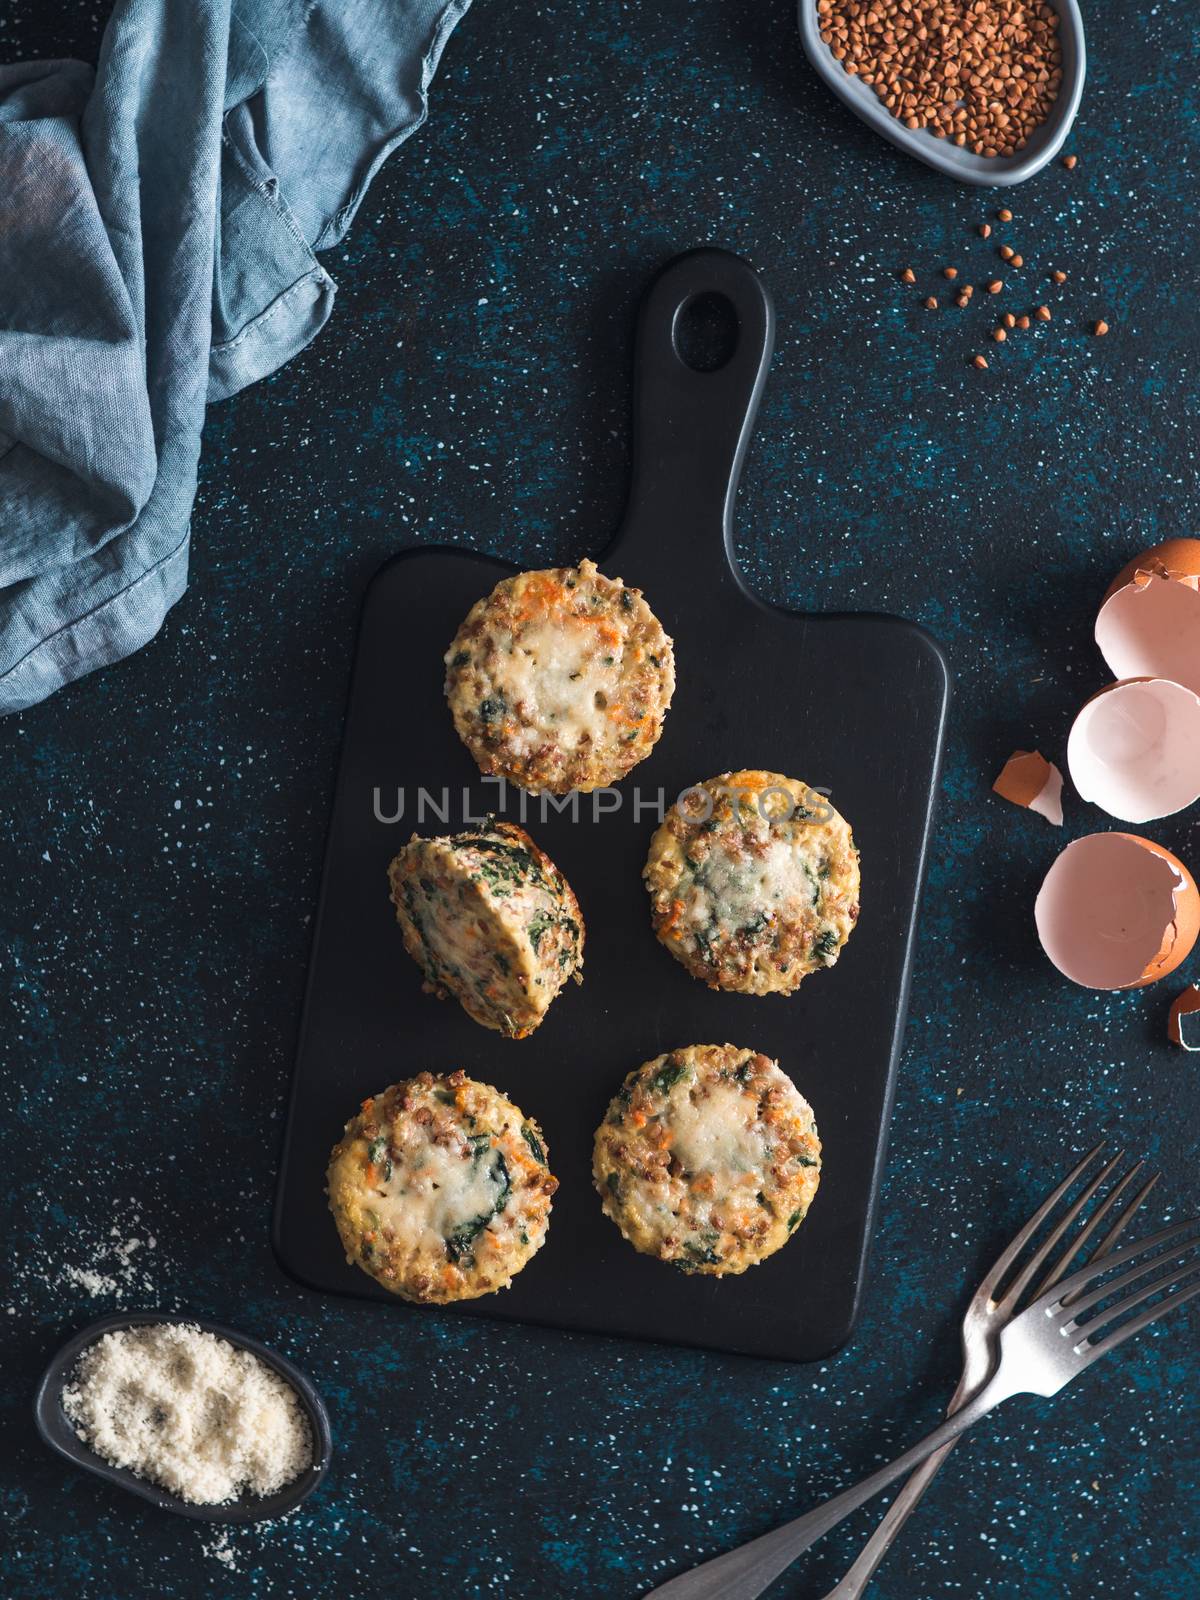 Buckwheat casserole with spinach,carrot,parmesan.Baked eggs with buckwheat,vegetables and cheese.Ideas and recipes healthy easy breakfast,lunch,kids meal,snack - vegetables muffins.Copy space.Top view